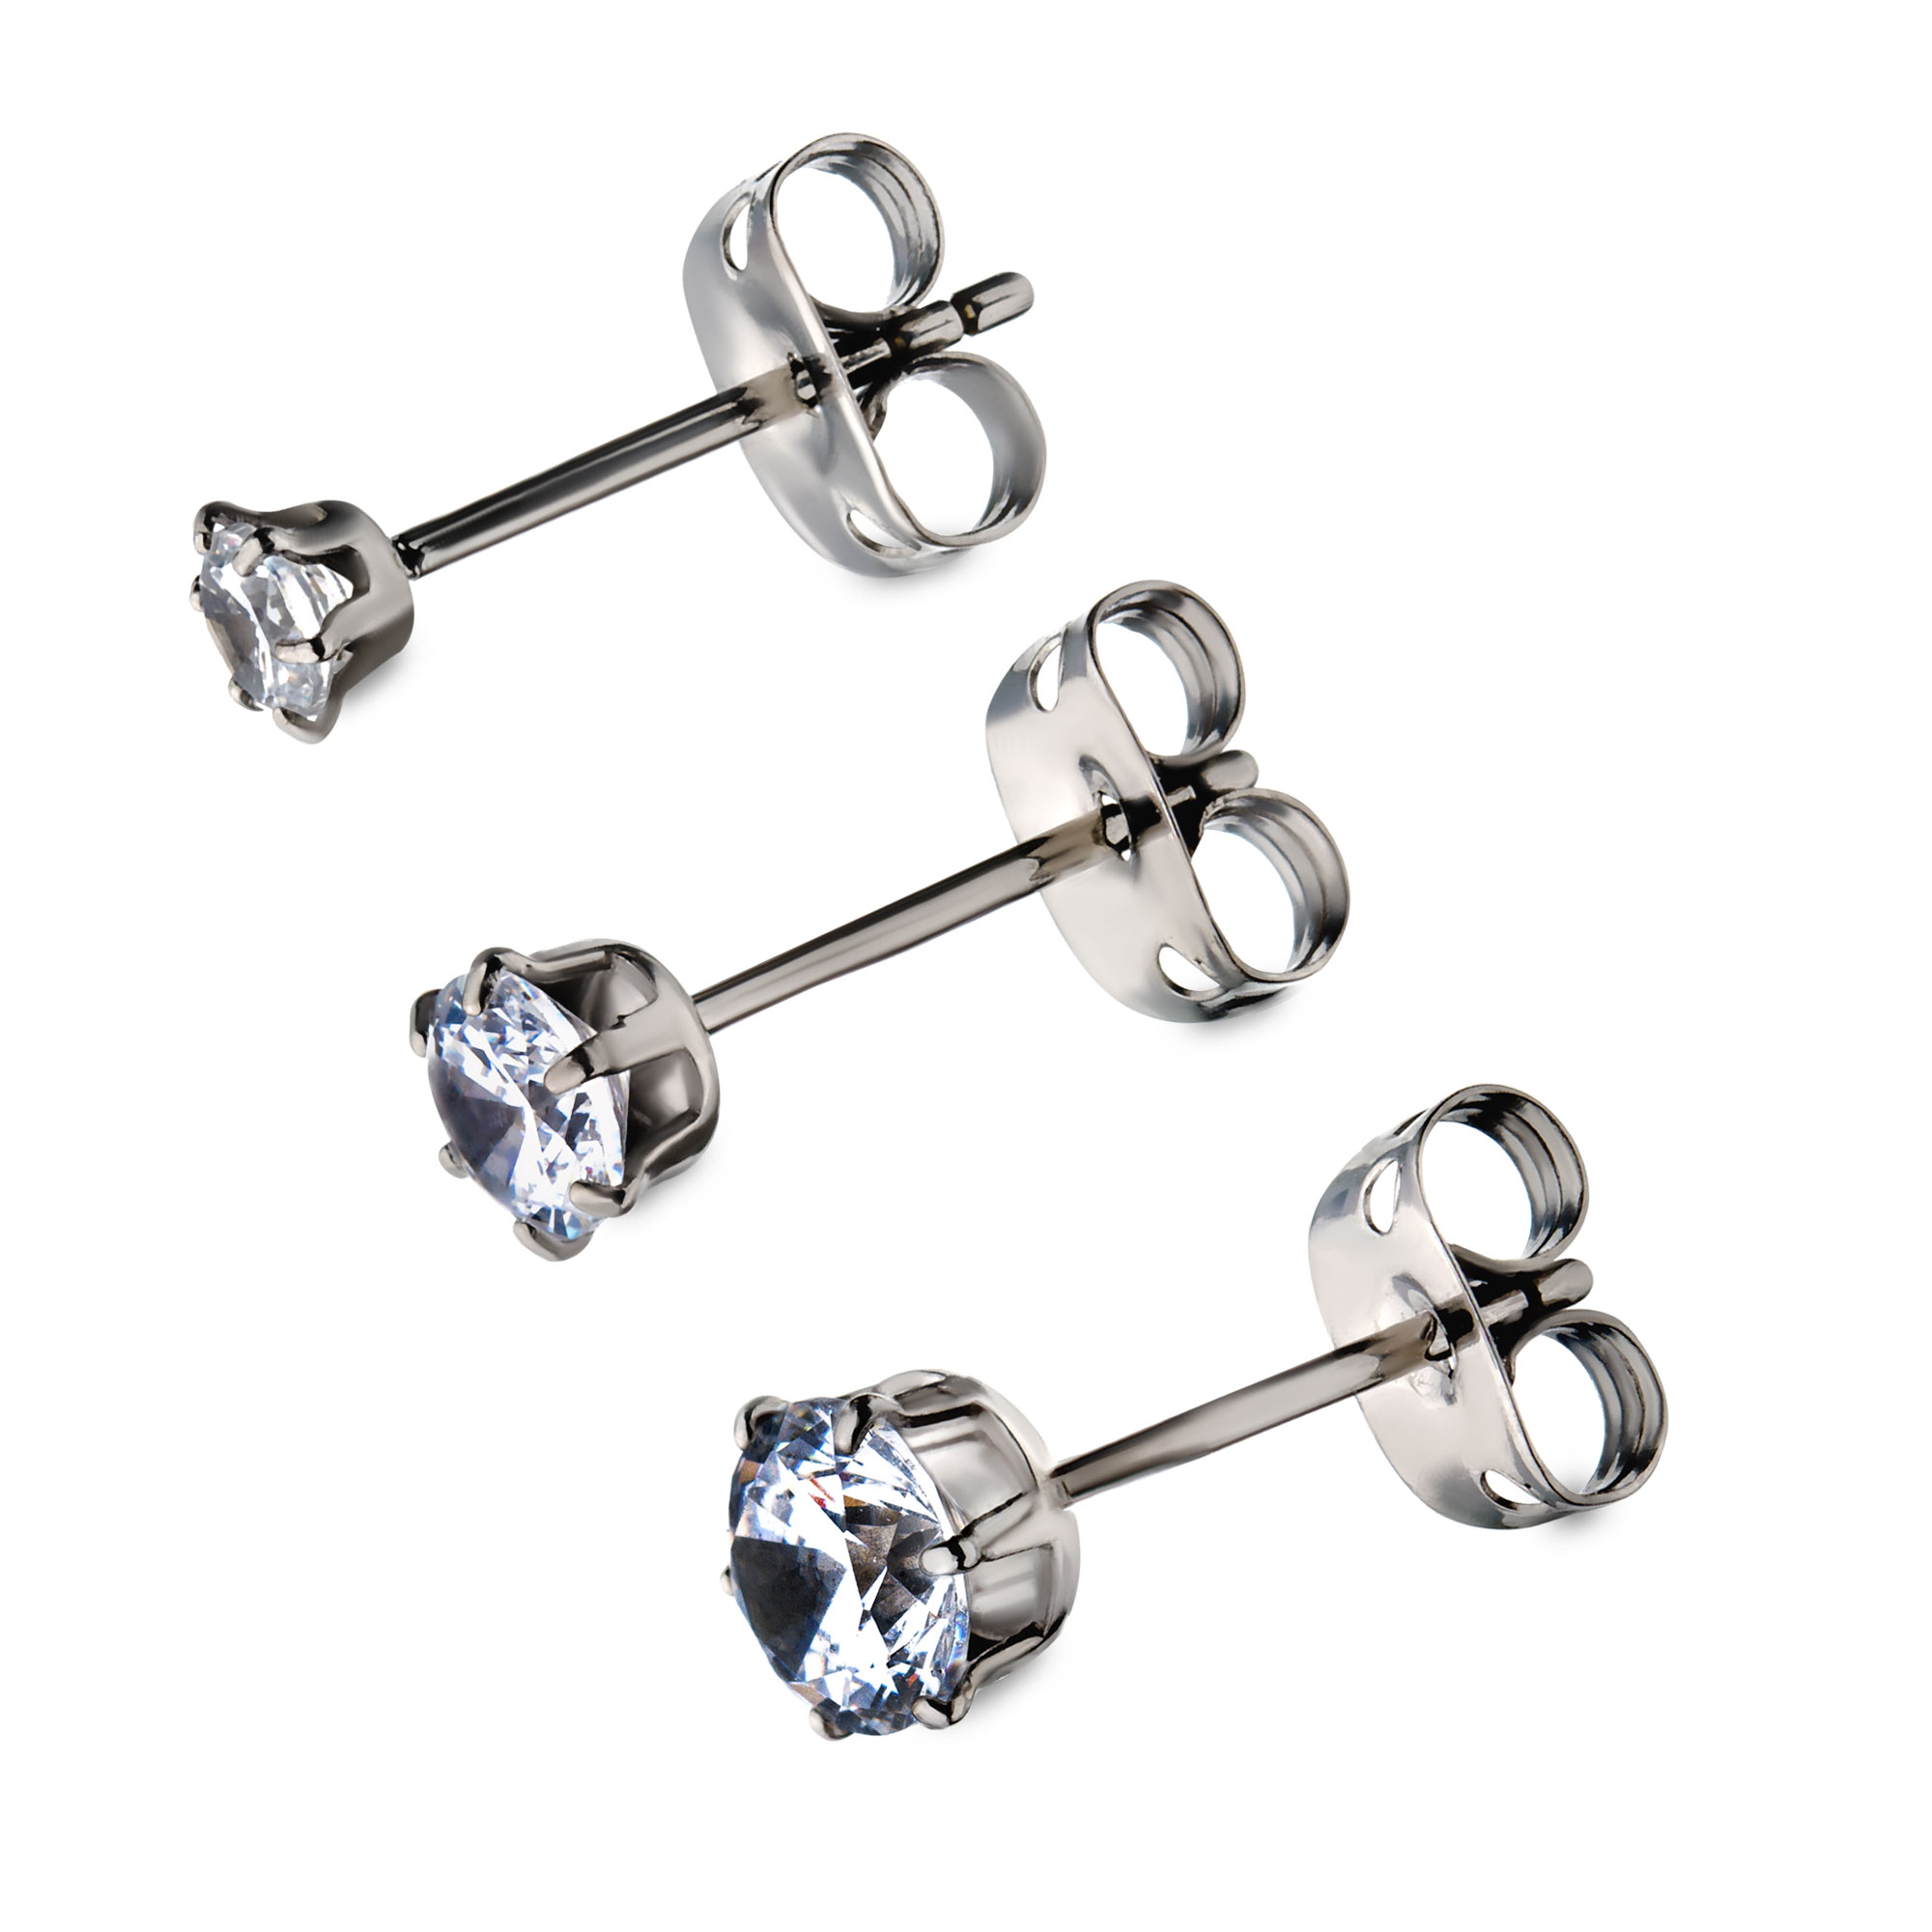 20g Titanium Post and Butterfly Back with Prong Set CZ Stud Earrings Image 2 P.K. Bennett Jewelers Mundelein, IL